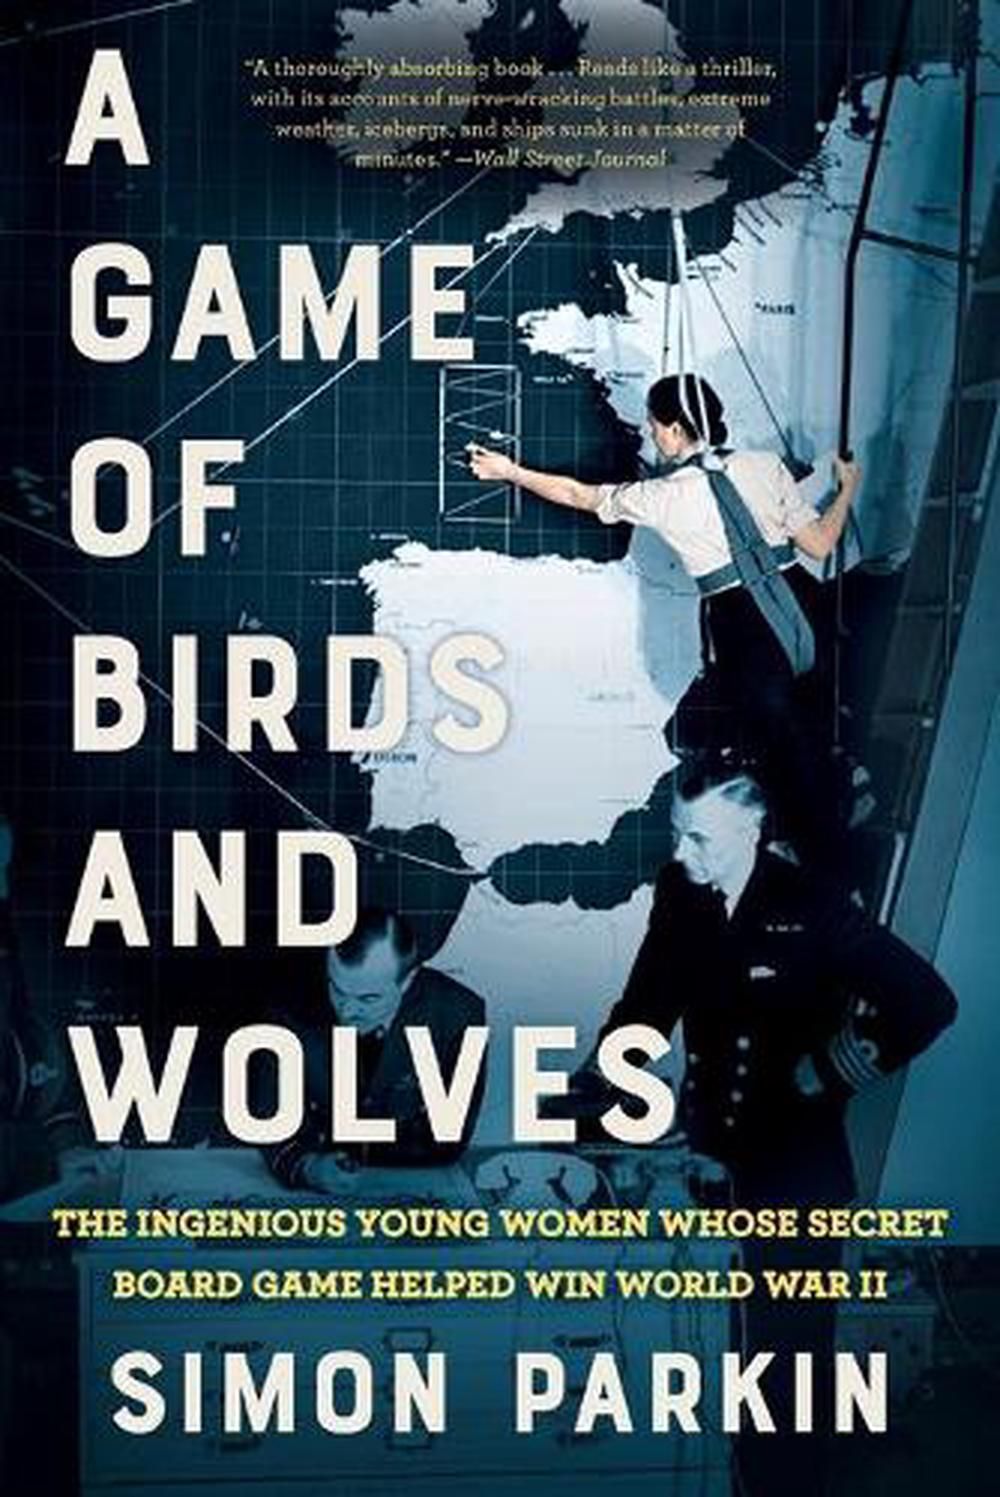 A GAME OF BIRDS AND WOLVES: Secret Game Helped Win World War II